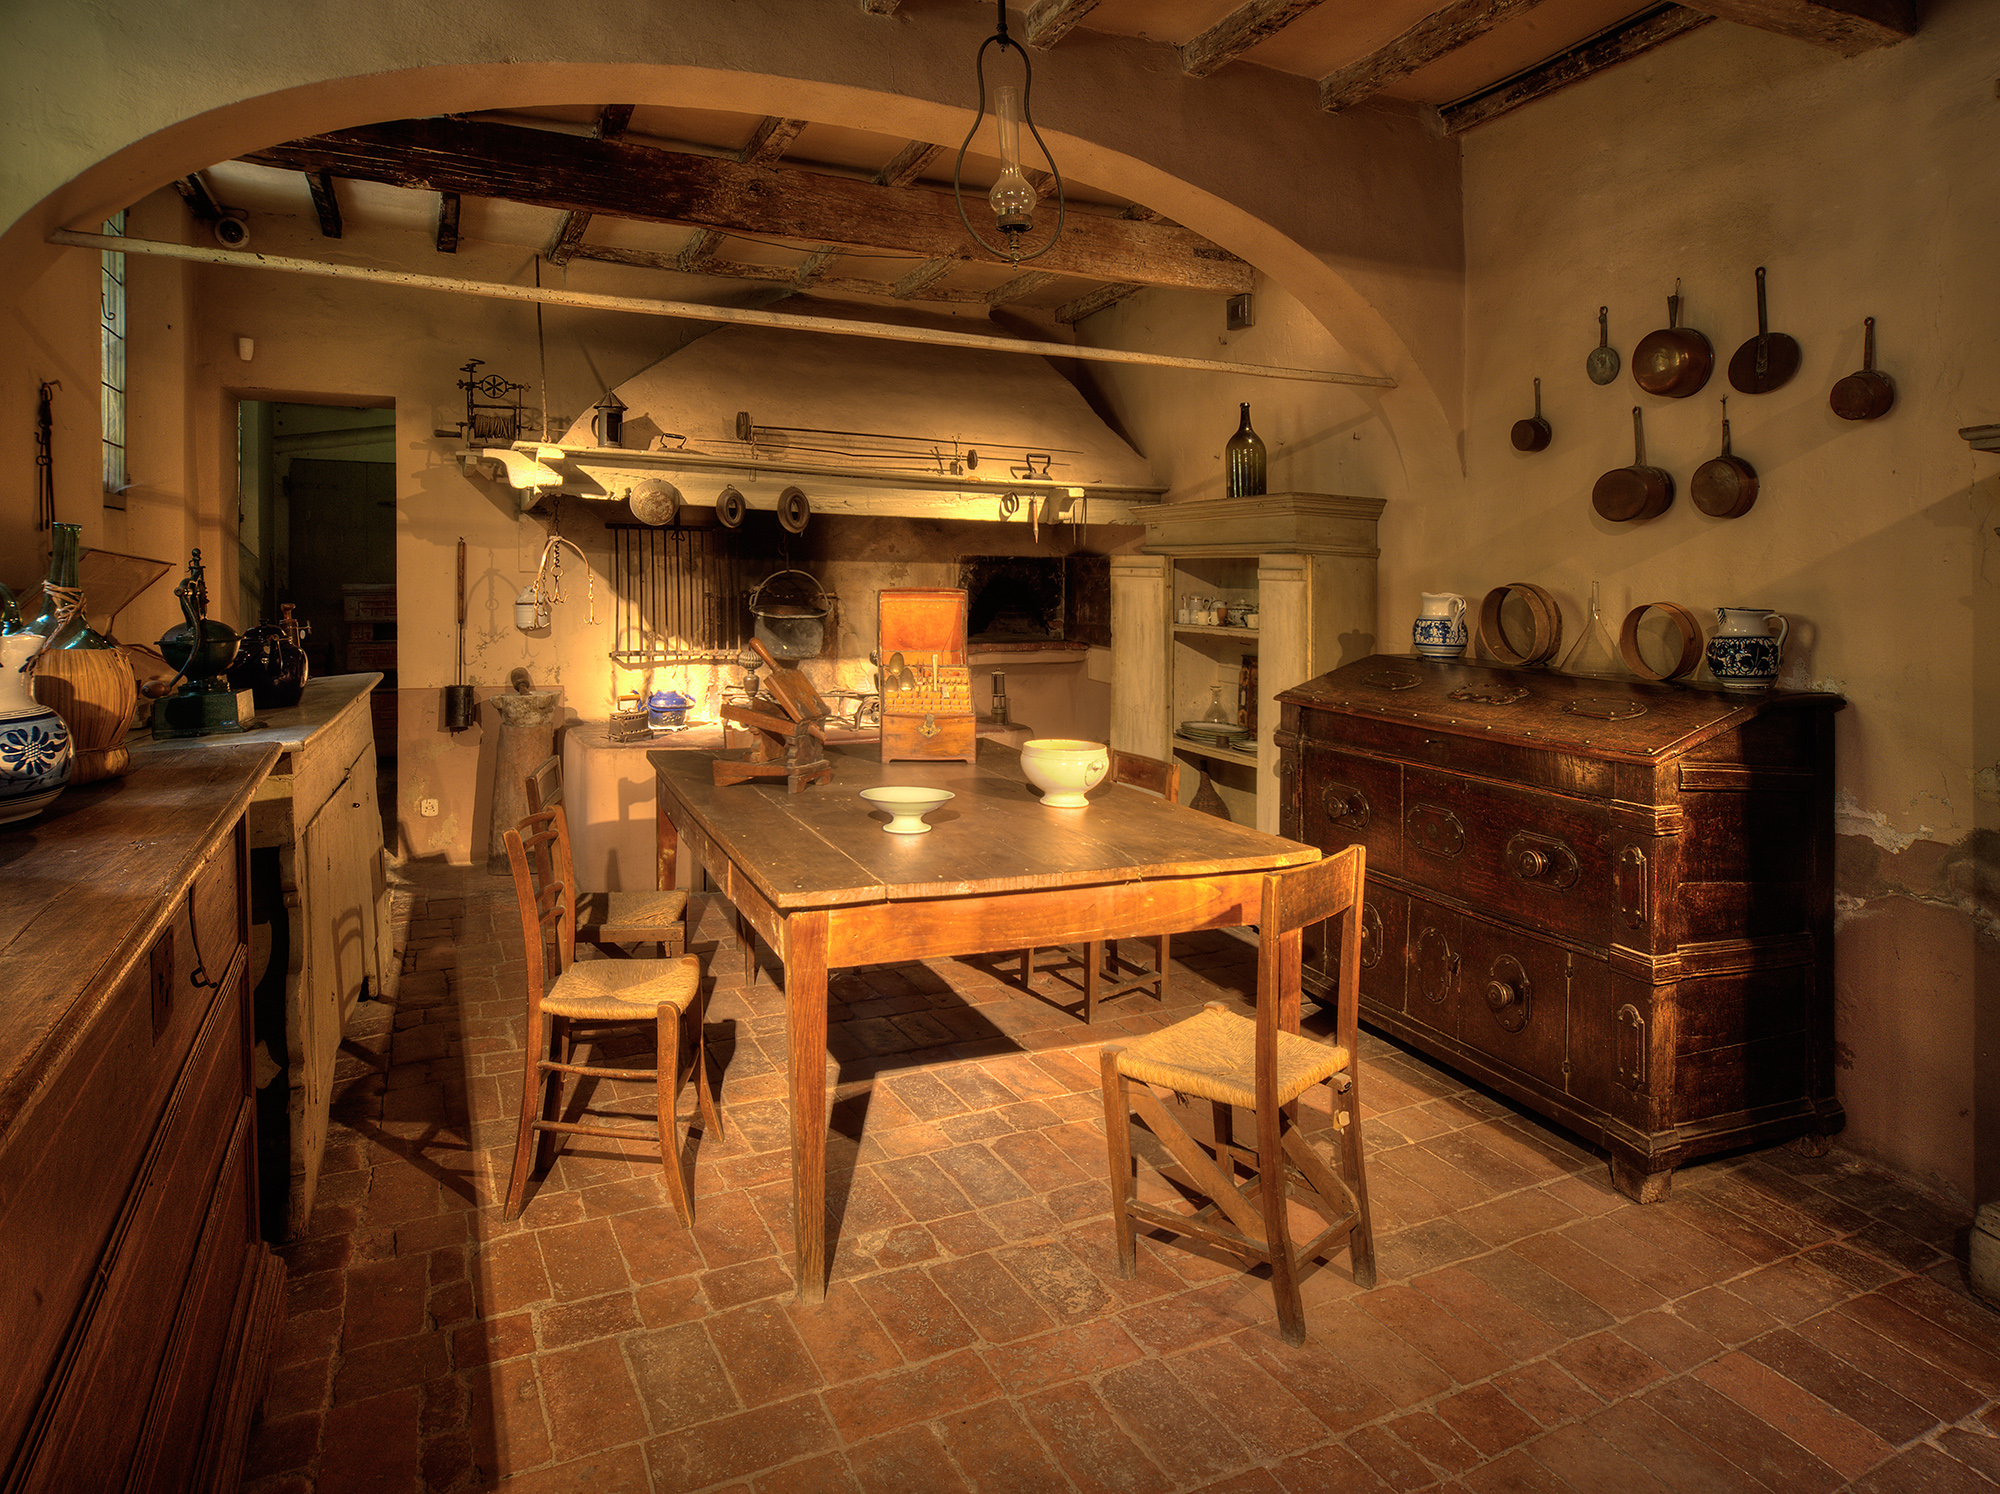 Photo archives Civic Museums of Imola immagine dell'evento: Imola's Civic Museums: the historical kitchen of Palazzo Tozzoni.